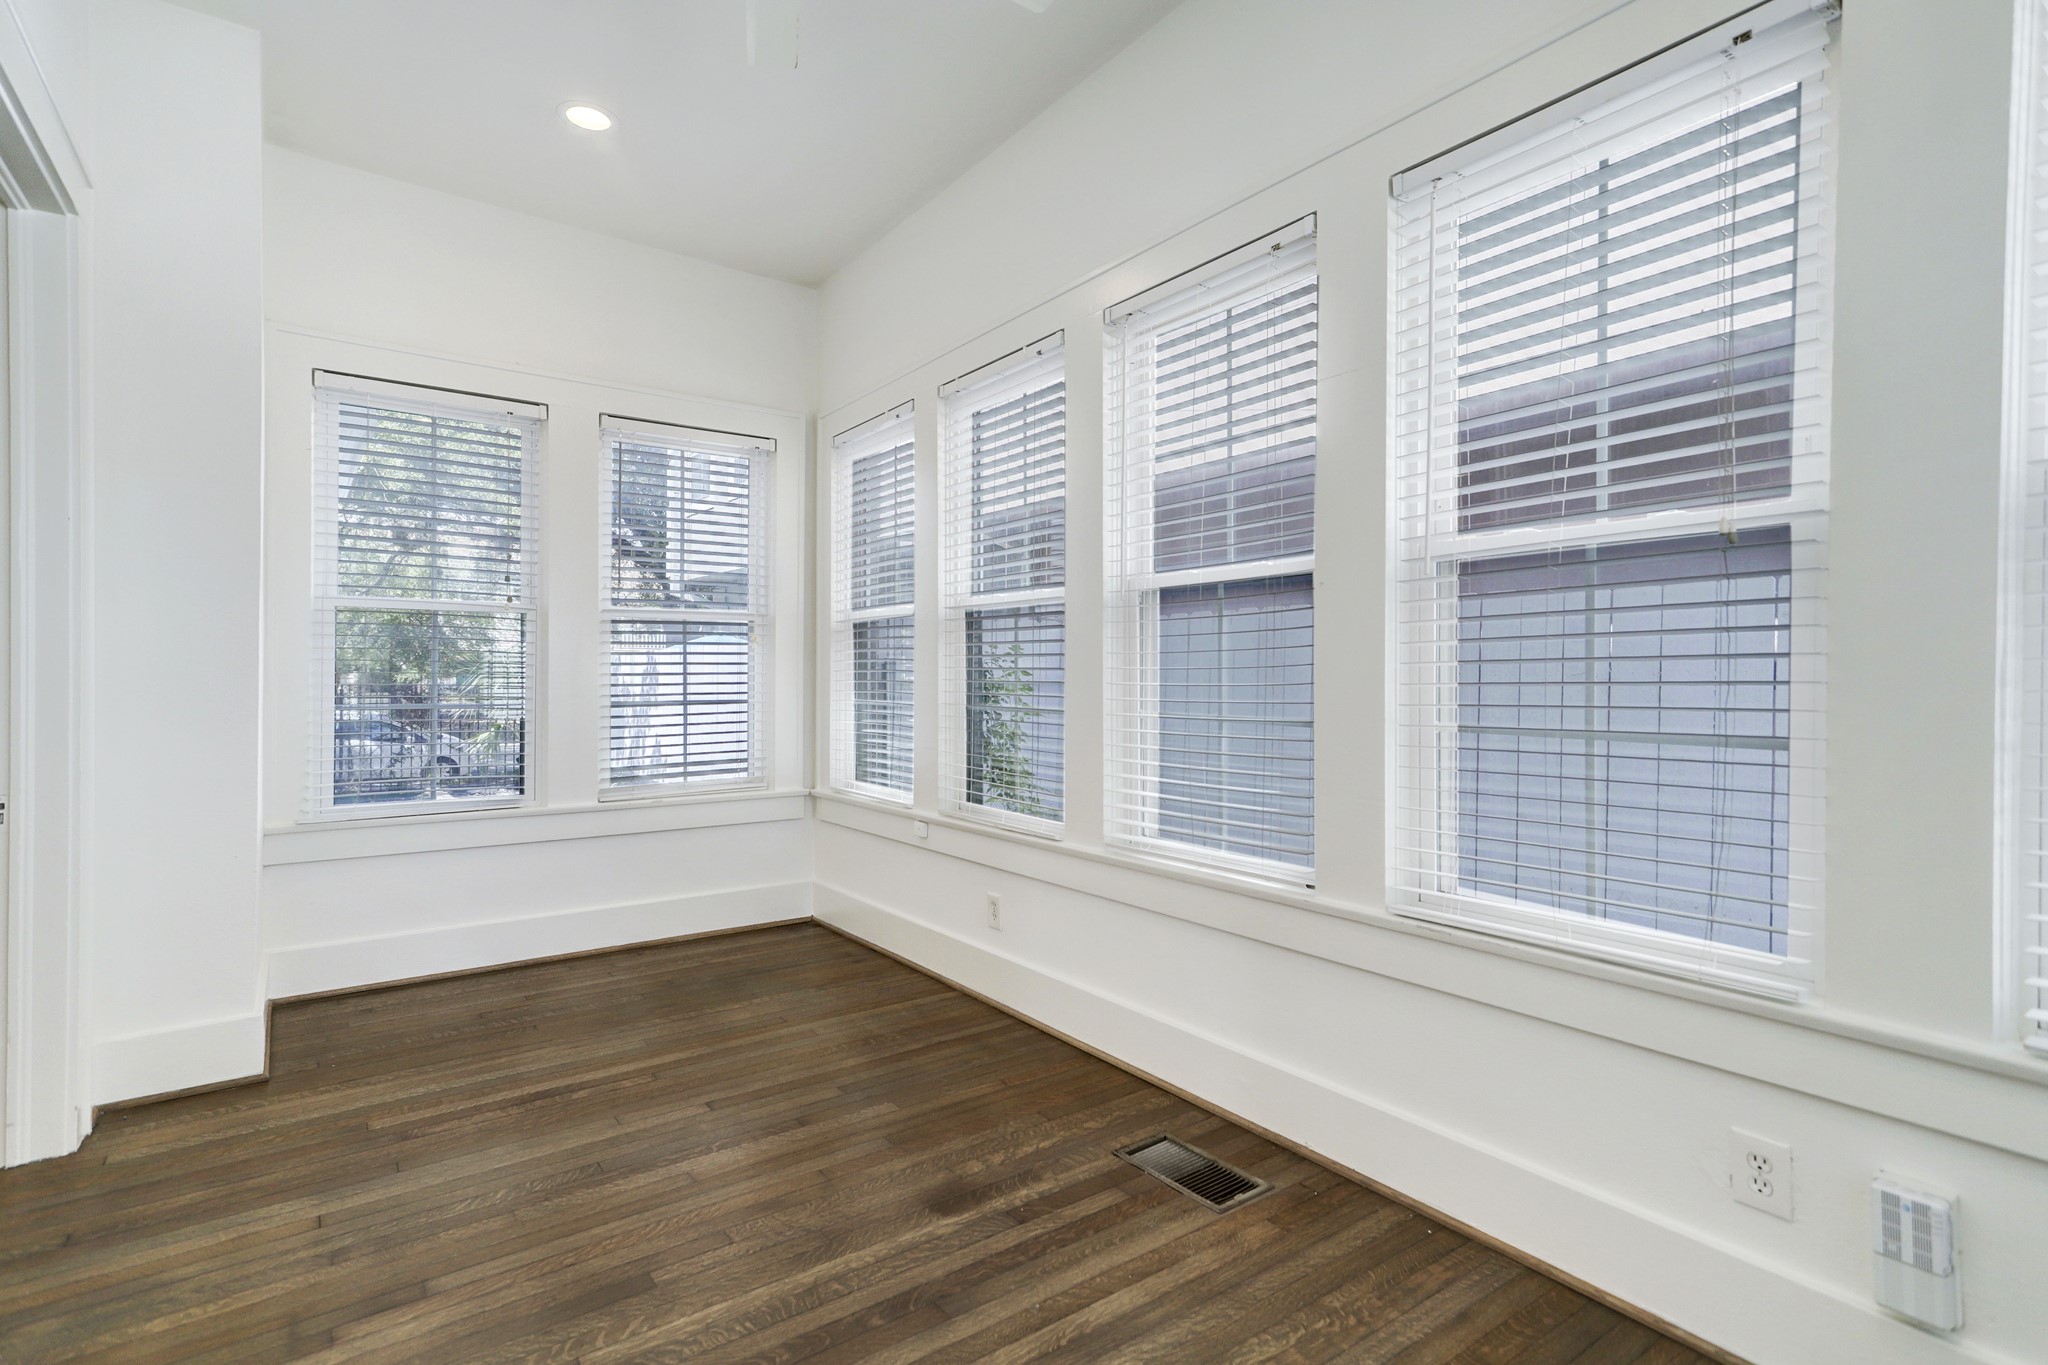 RECENT BLINDS THROUGHOUT THE HOME ARE A GREAT ADDITION THAT HAVE ALREADY BEEN INSTALLED SO YOU DON'T HAVE TO!